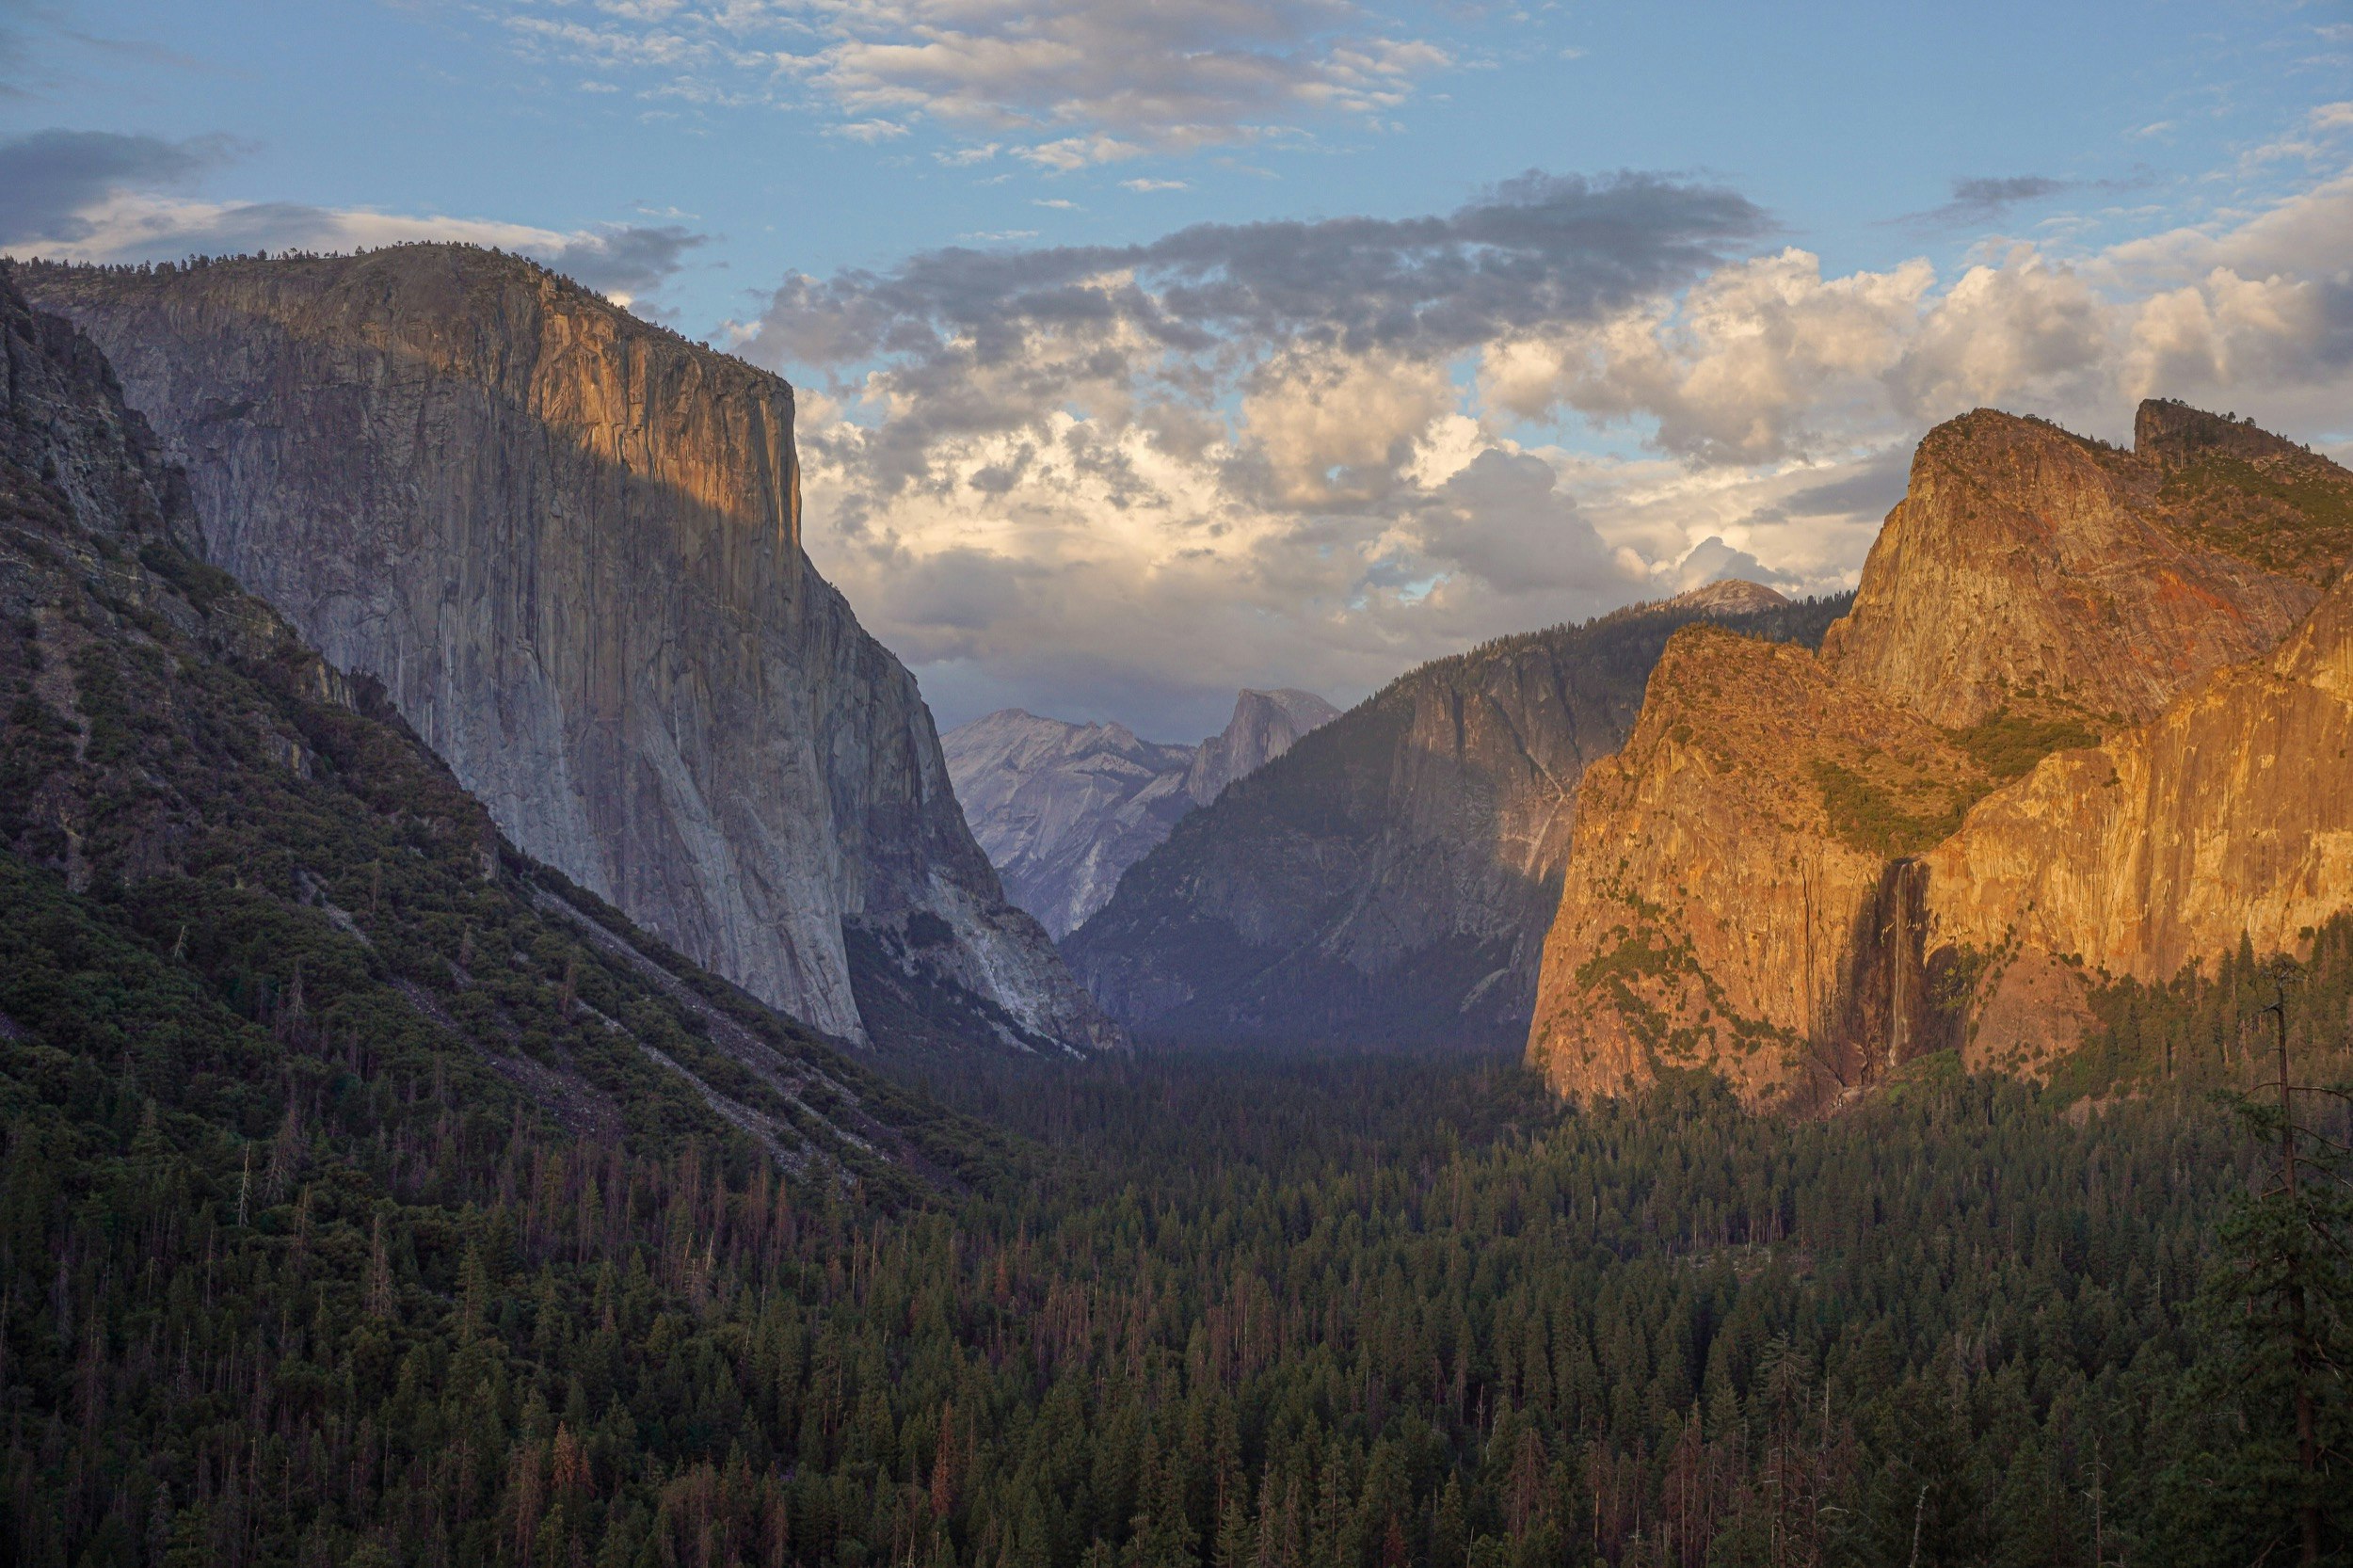 The famous Tunnel View through the granite peaks of Yosemite; how to photograph Yosemite like Ansel Adams